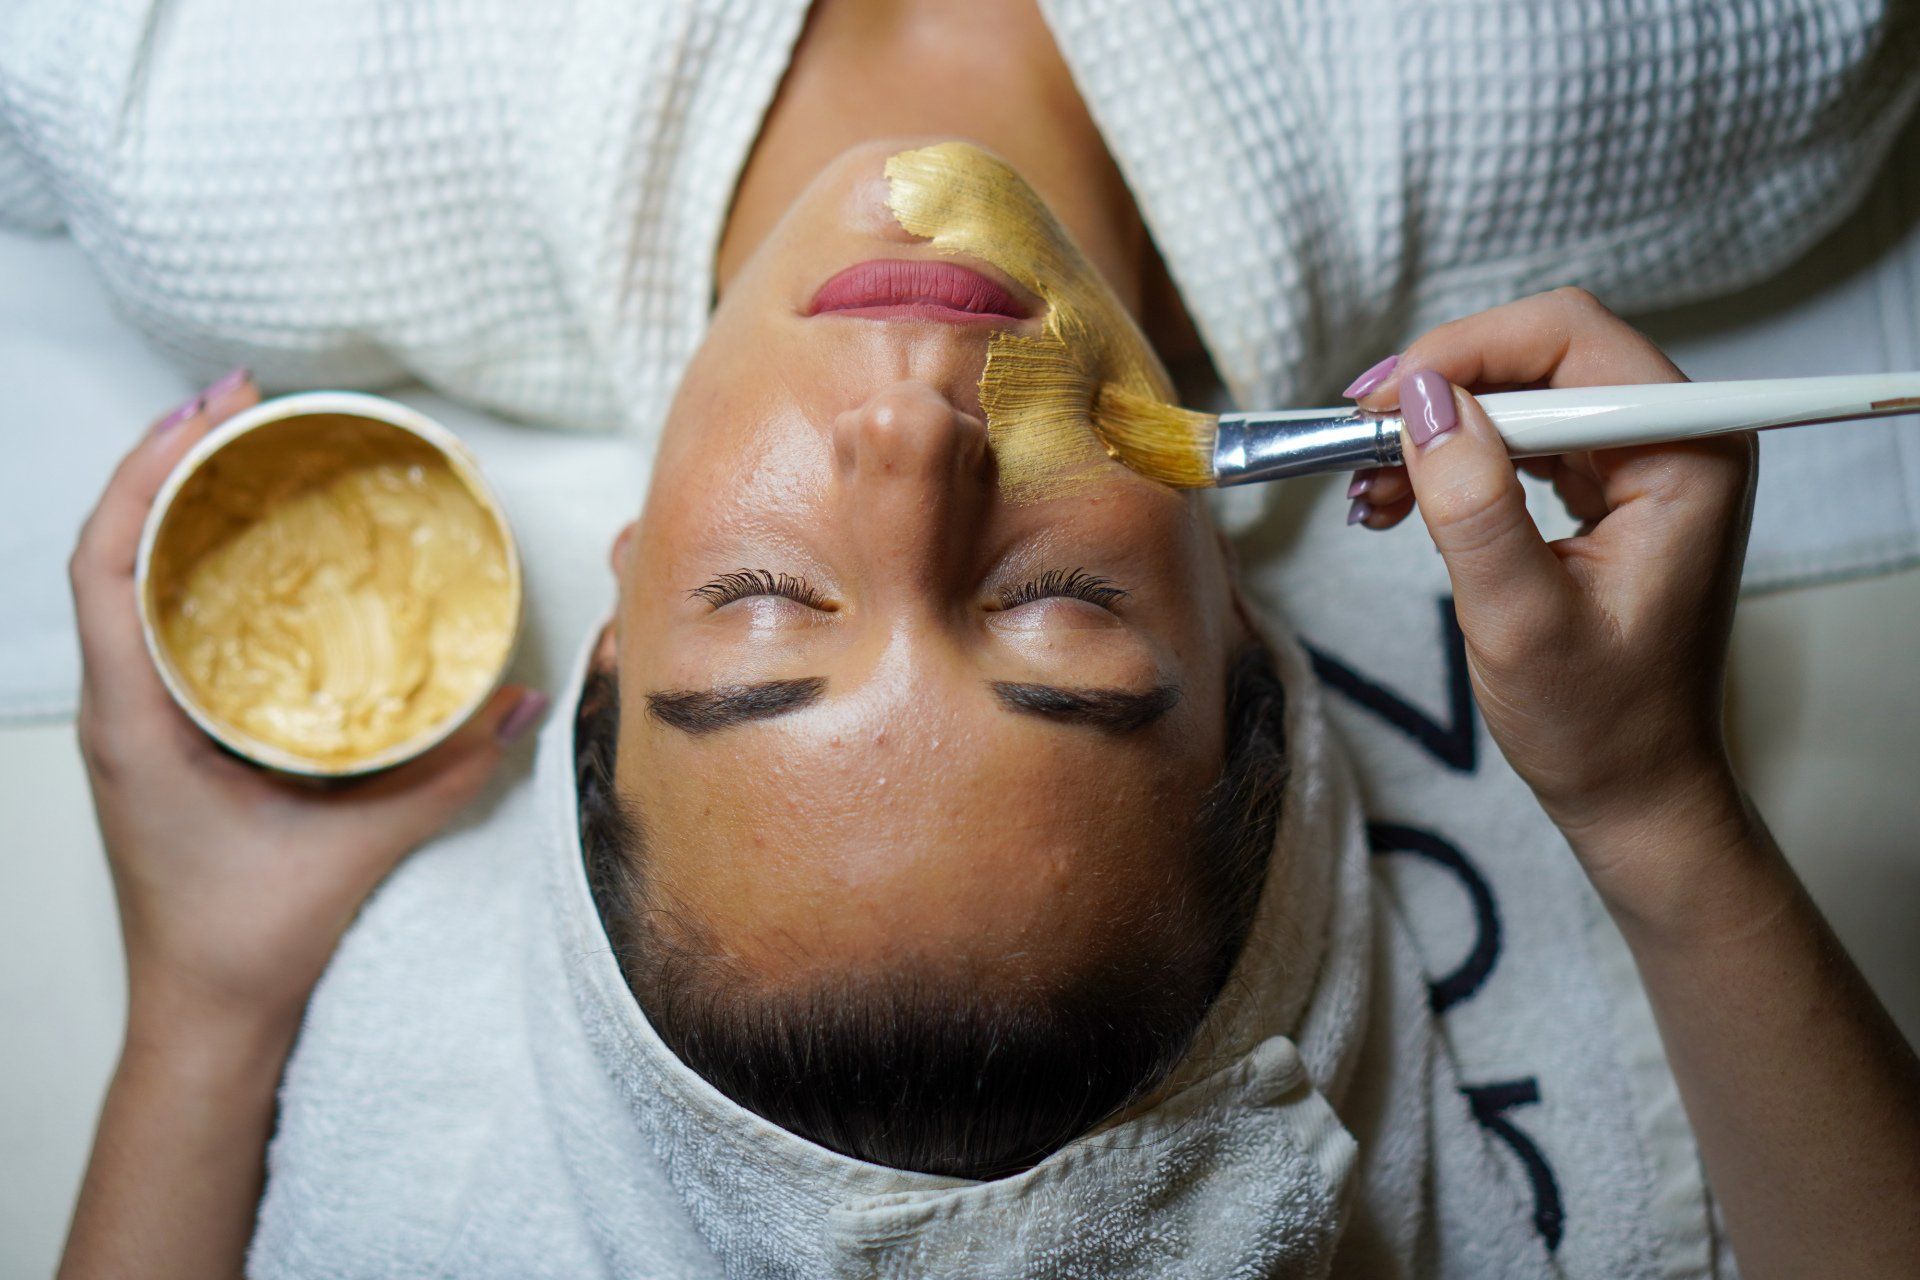 A woman is getting a facial treatment at a spa.